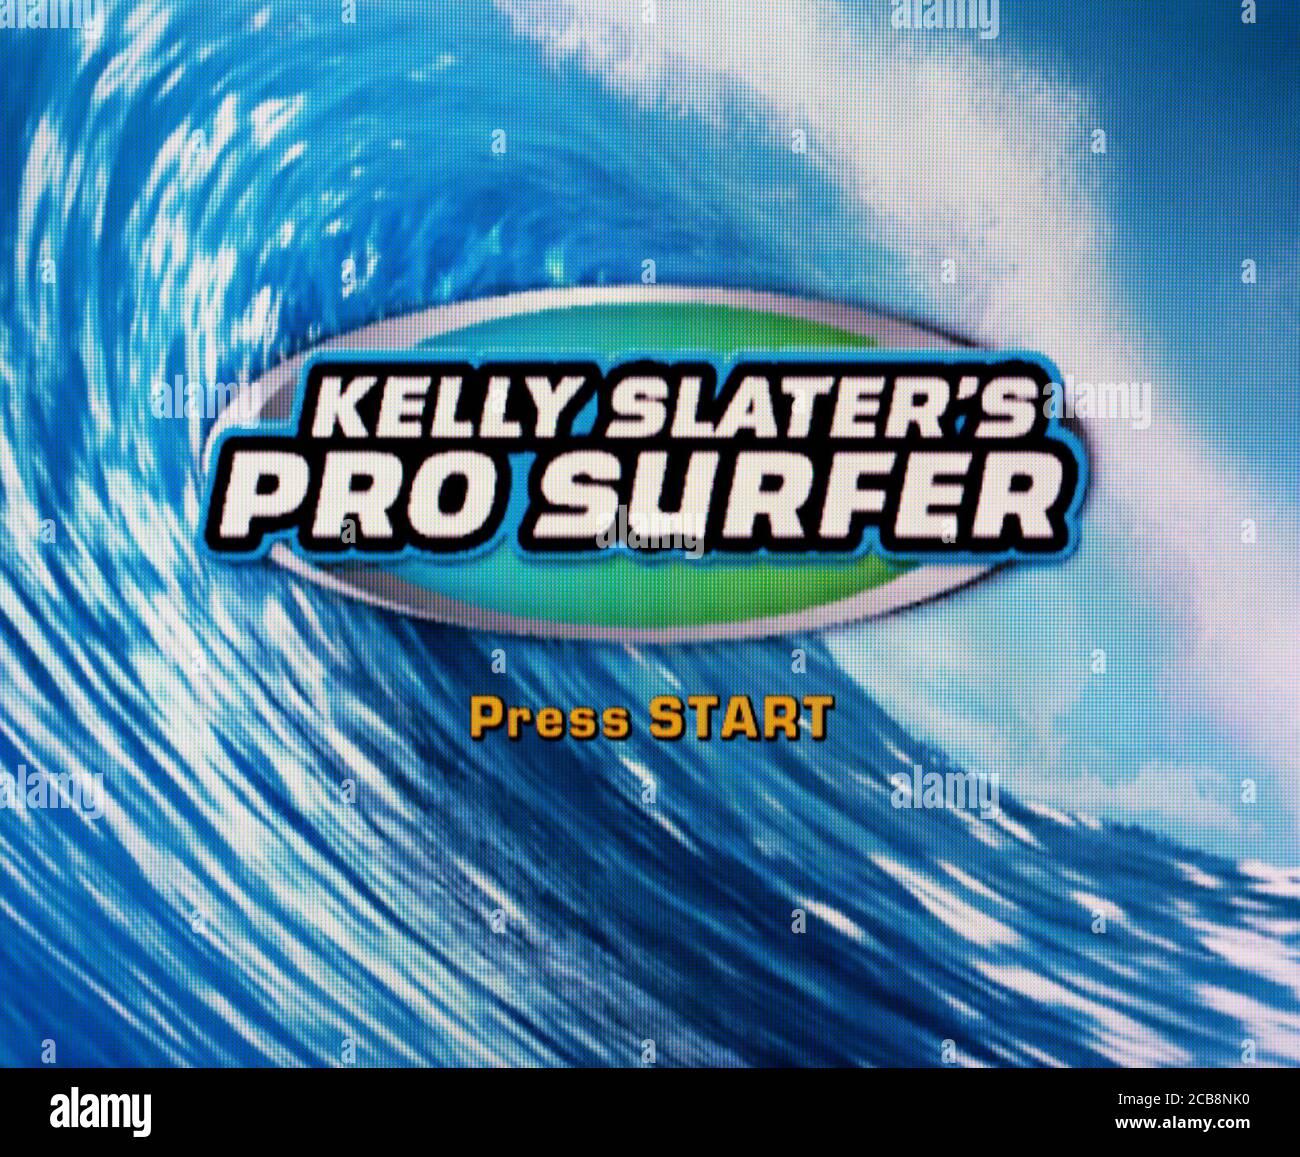 Kelly Slater's Pro Surfer - Nintendo Gamecube Videogame - Editorial use only Stock Photo